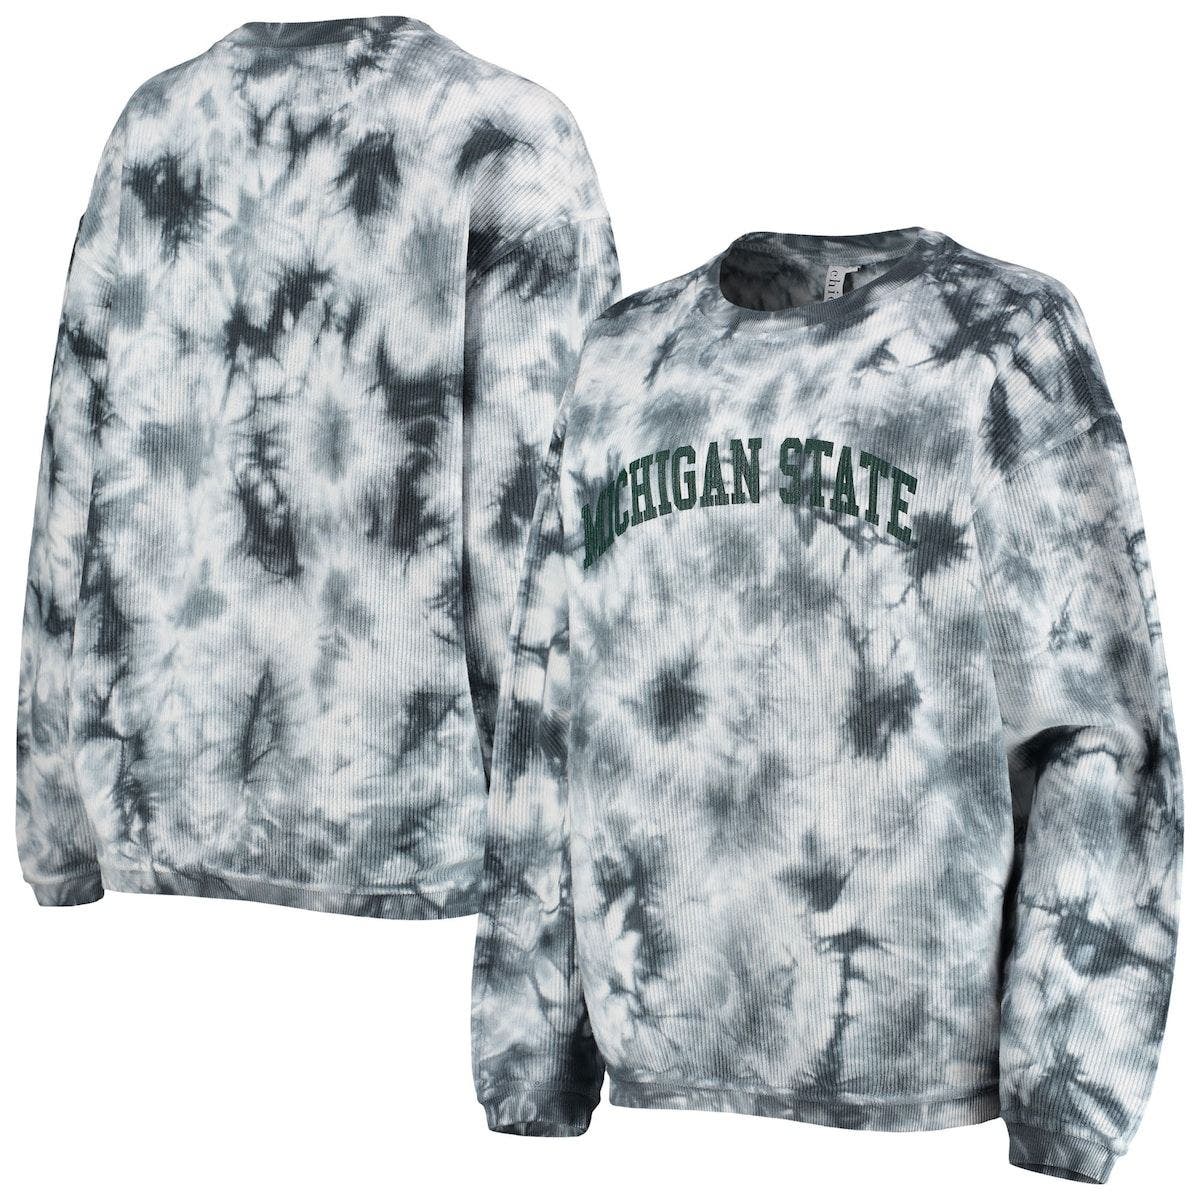 CHICKA-D Women's chicka-d White/Charcoal Michigan State Spartans Tie Dye Corded Pullover Sweatshirt at Nordstrom